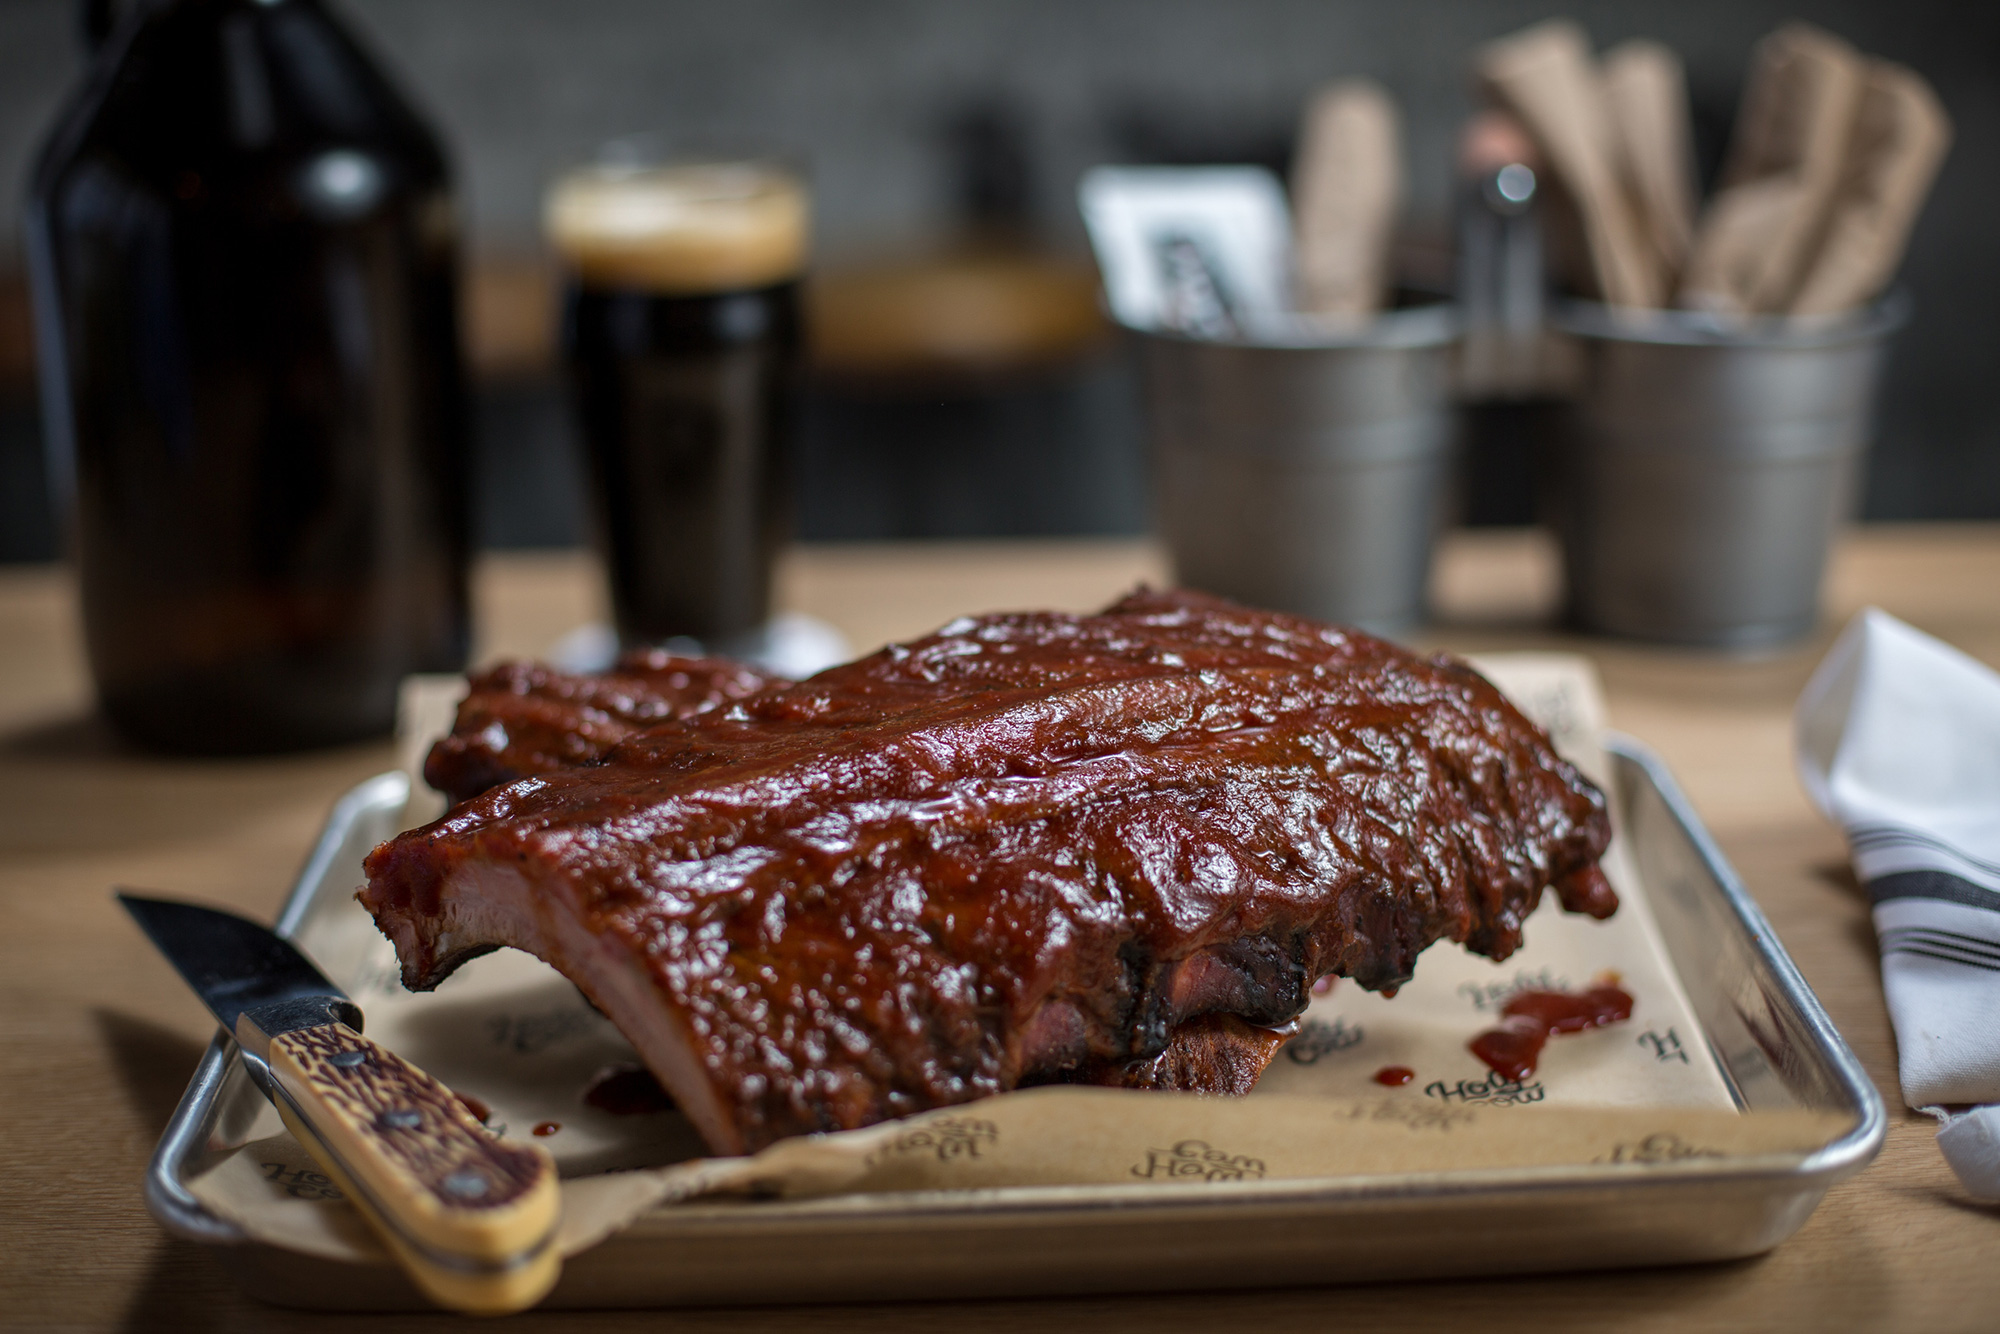 Zagat says: One of LA’s 8 best BBQ joints